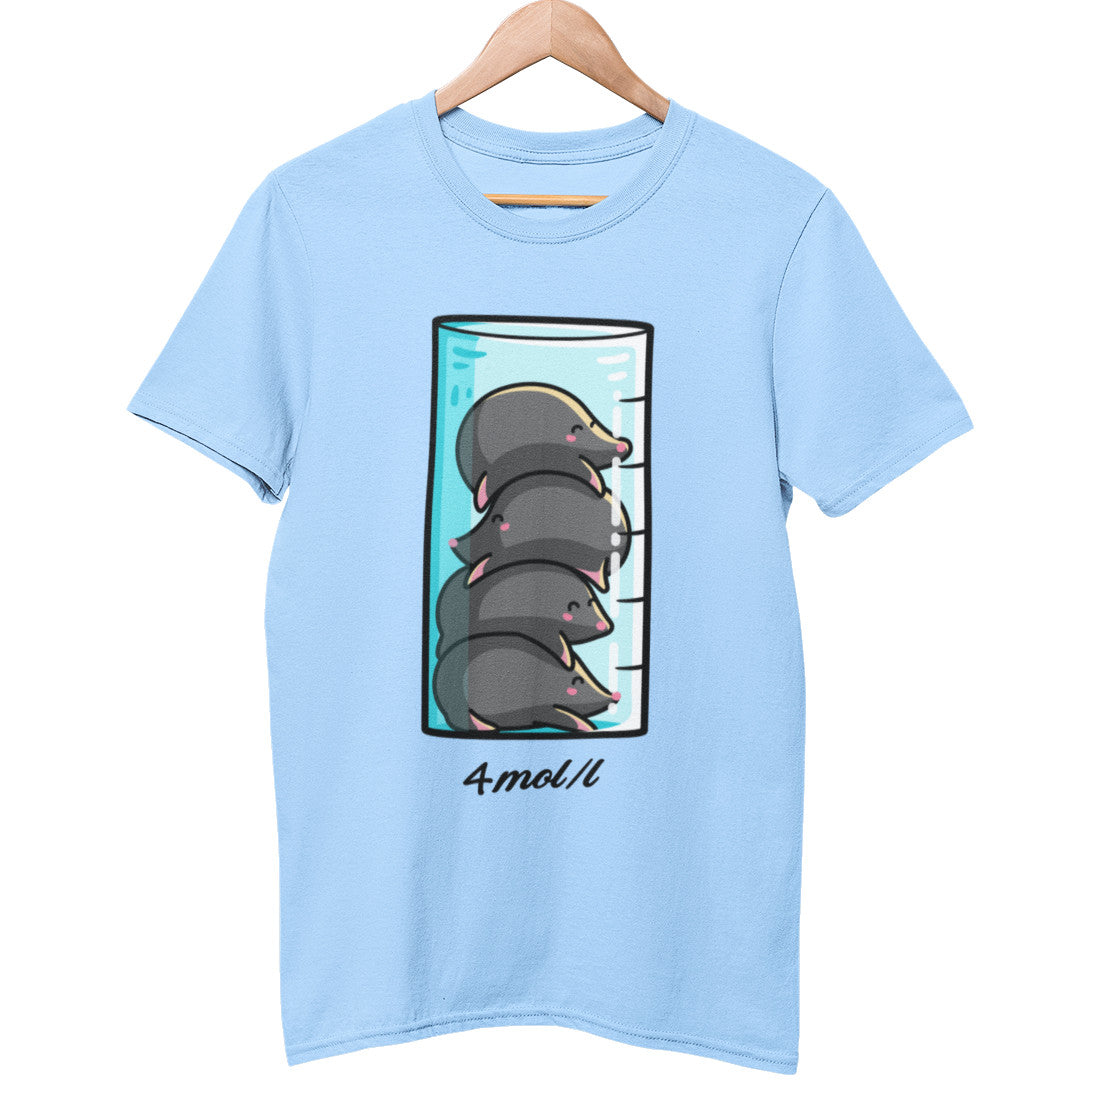 A pale blue unisex crewneck t-shirt on a wooden hanger with a design on its chest of a glass cylinder with a pile of four moles inside it and the writing 4 mol/l beneath